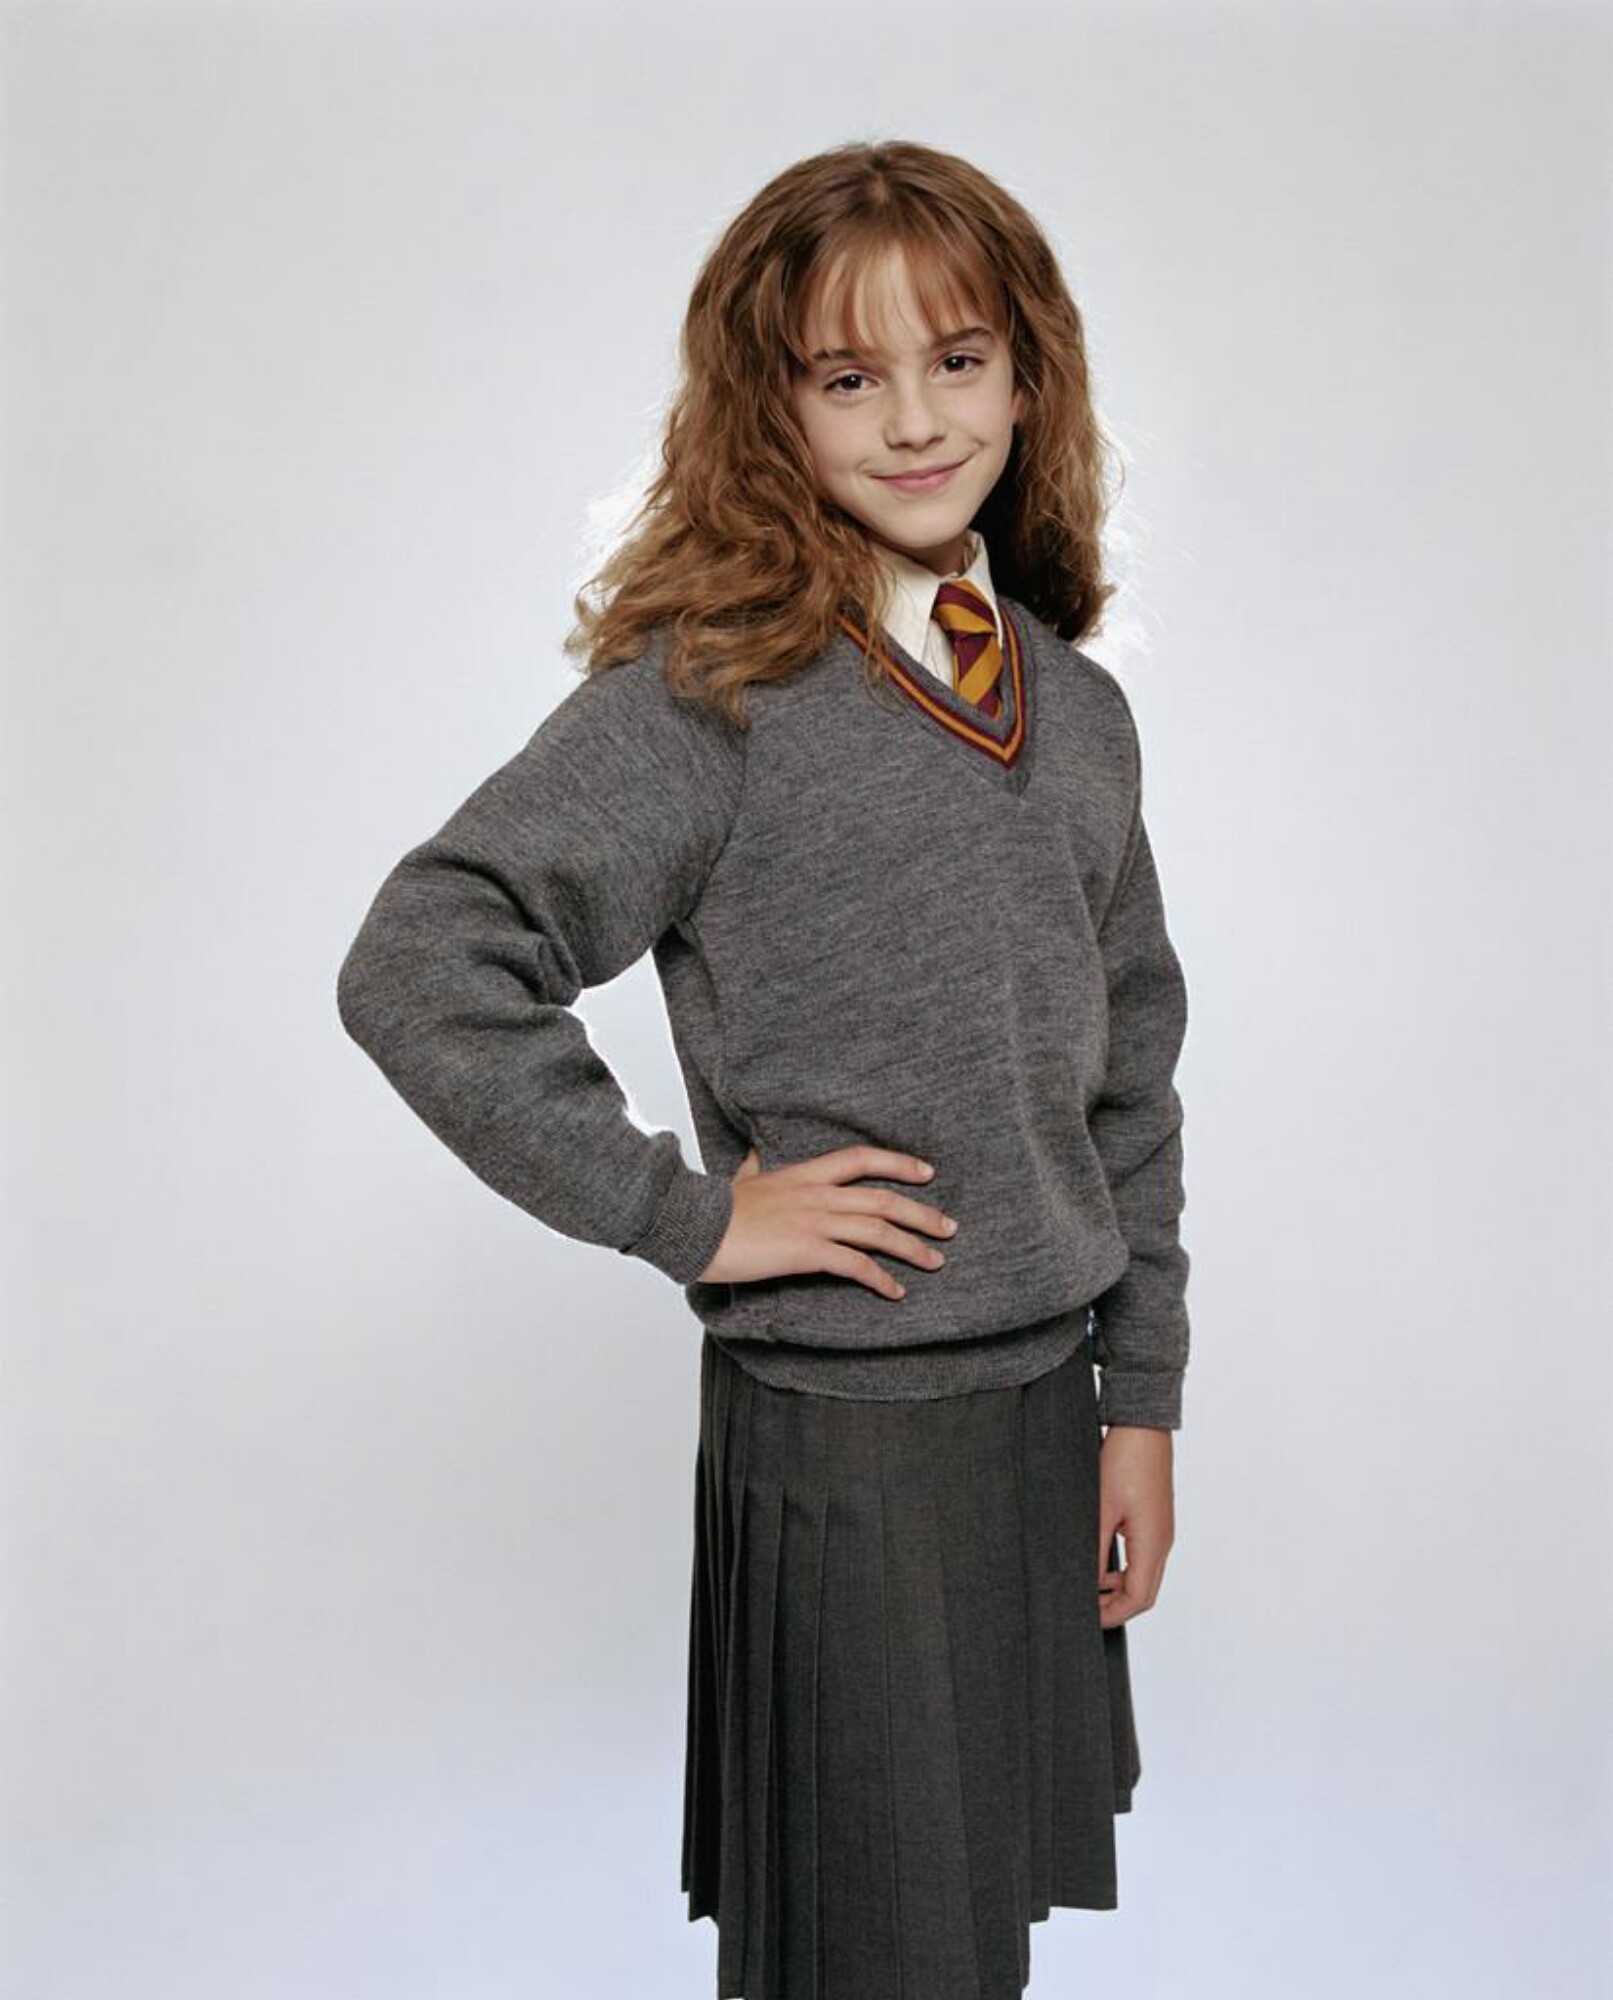 Emma Watson in Harry Potter and the Sorcerer's Stone